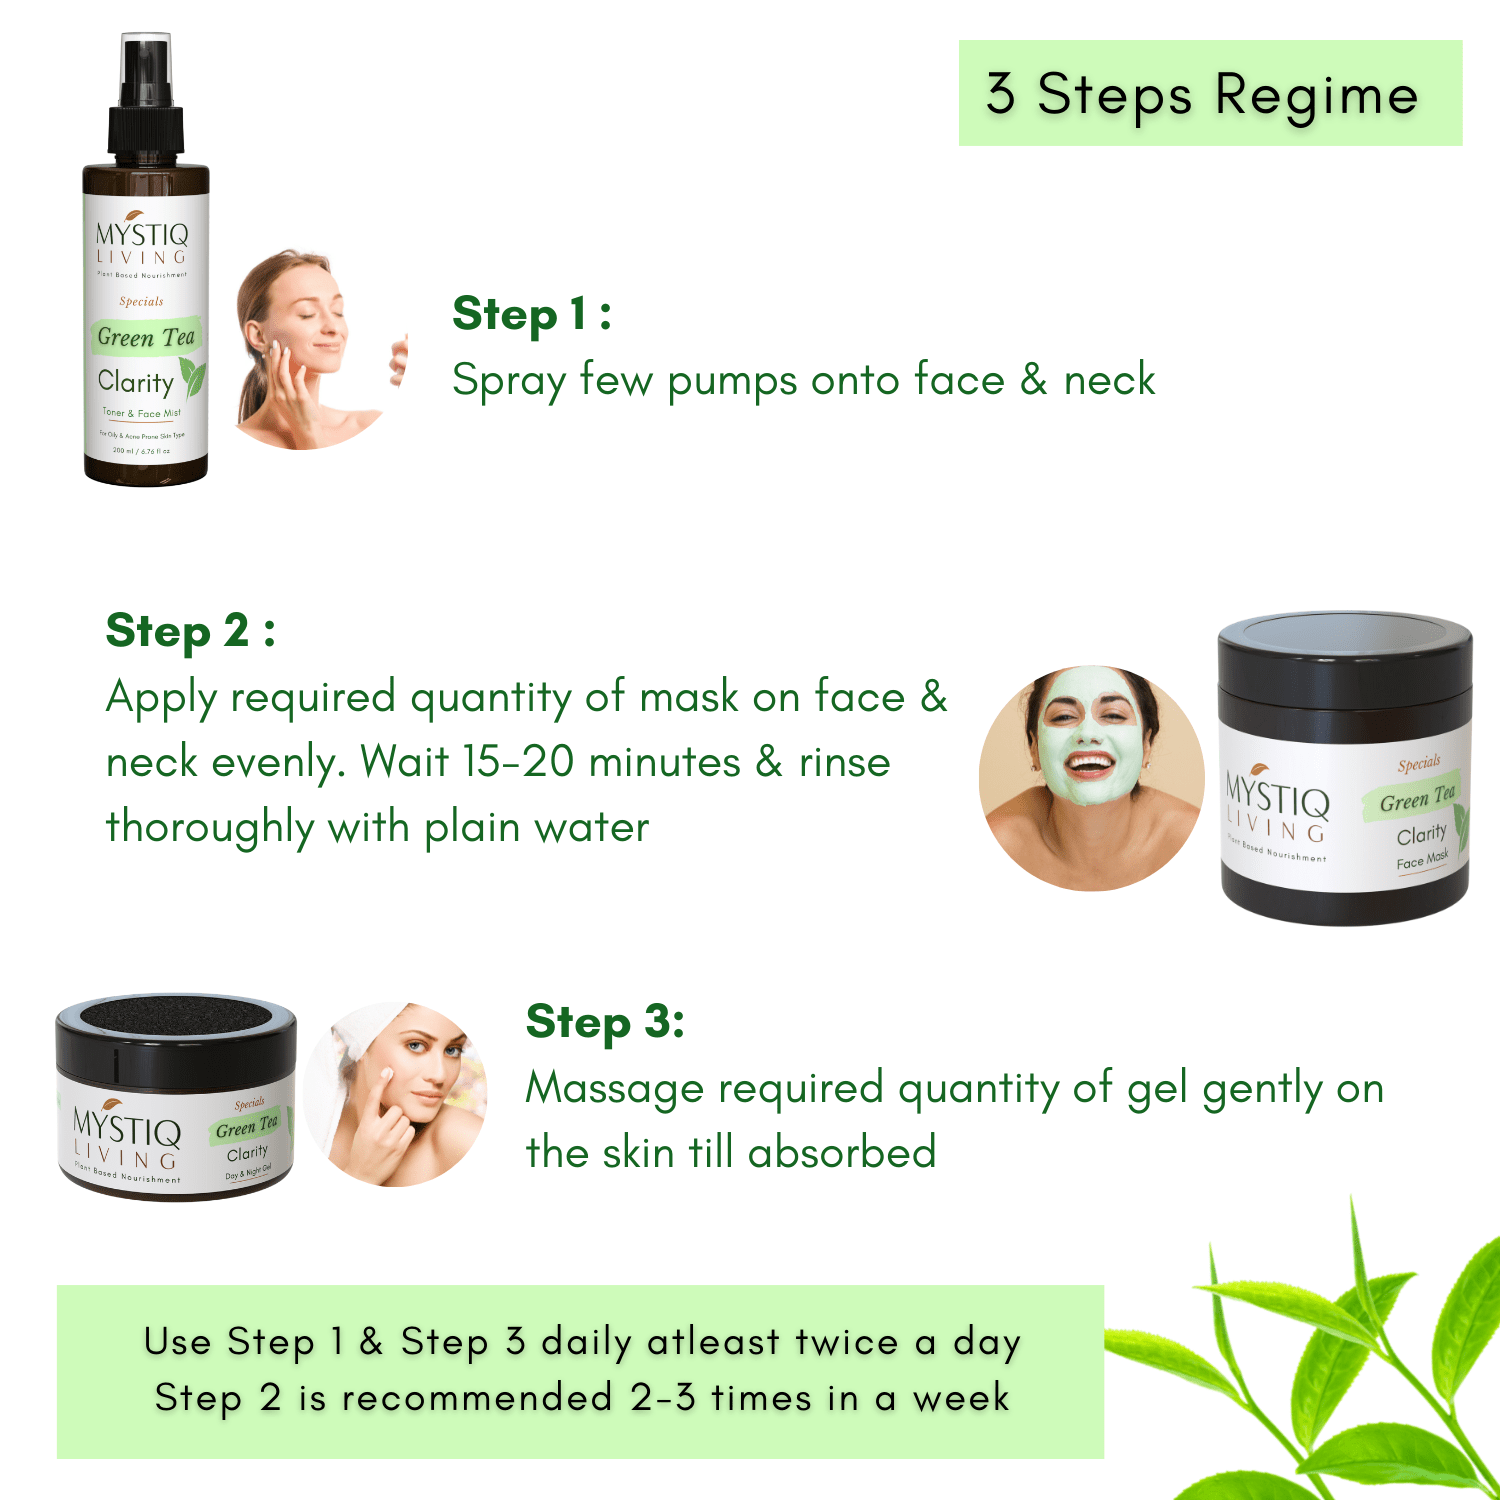 Green Tea Clarity Acne Kit (3 Products) | Complete Regime - steps to use